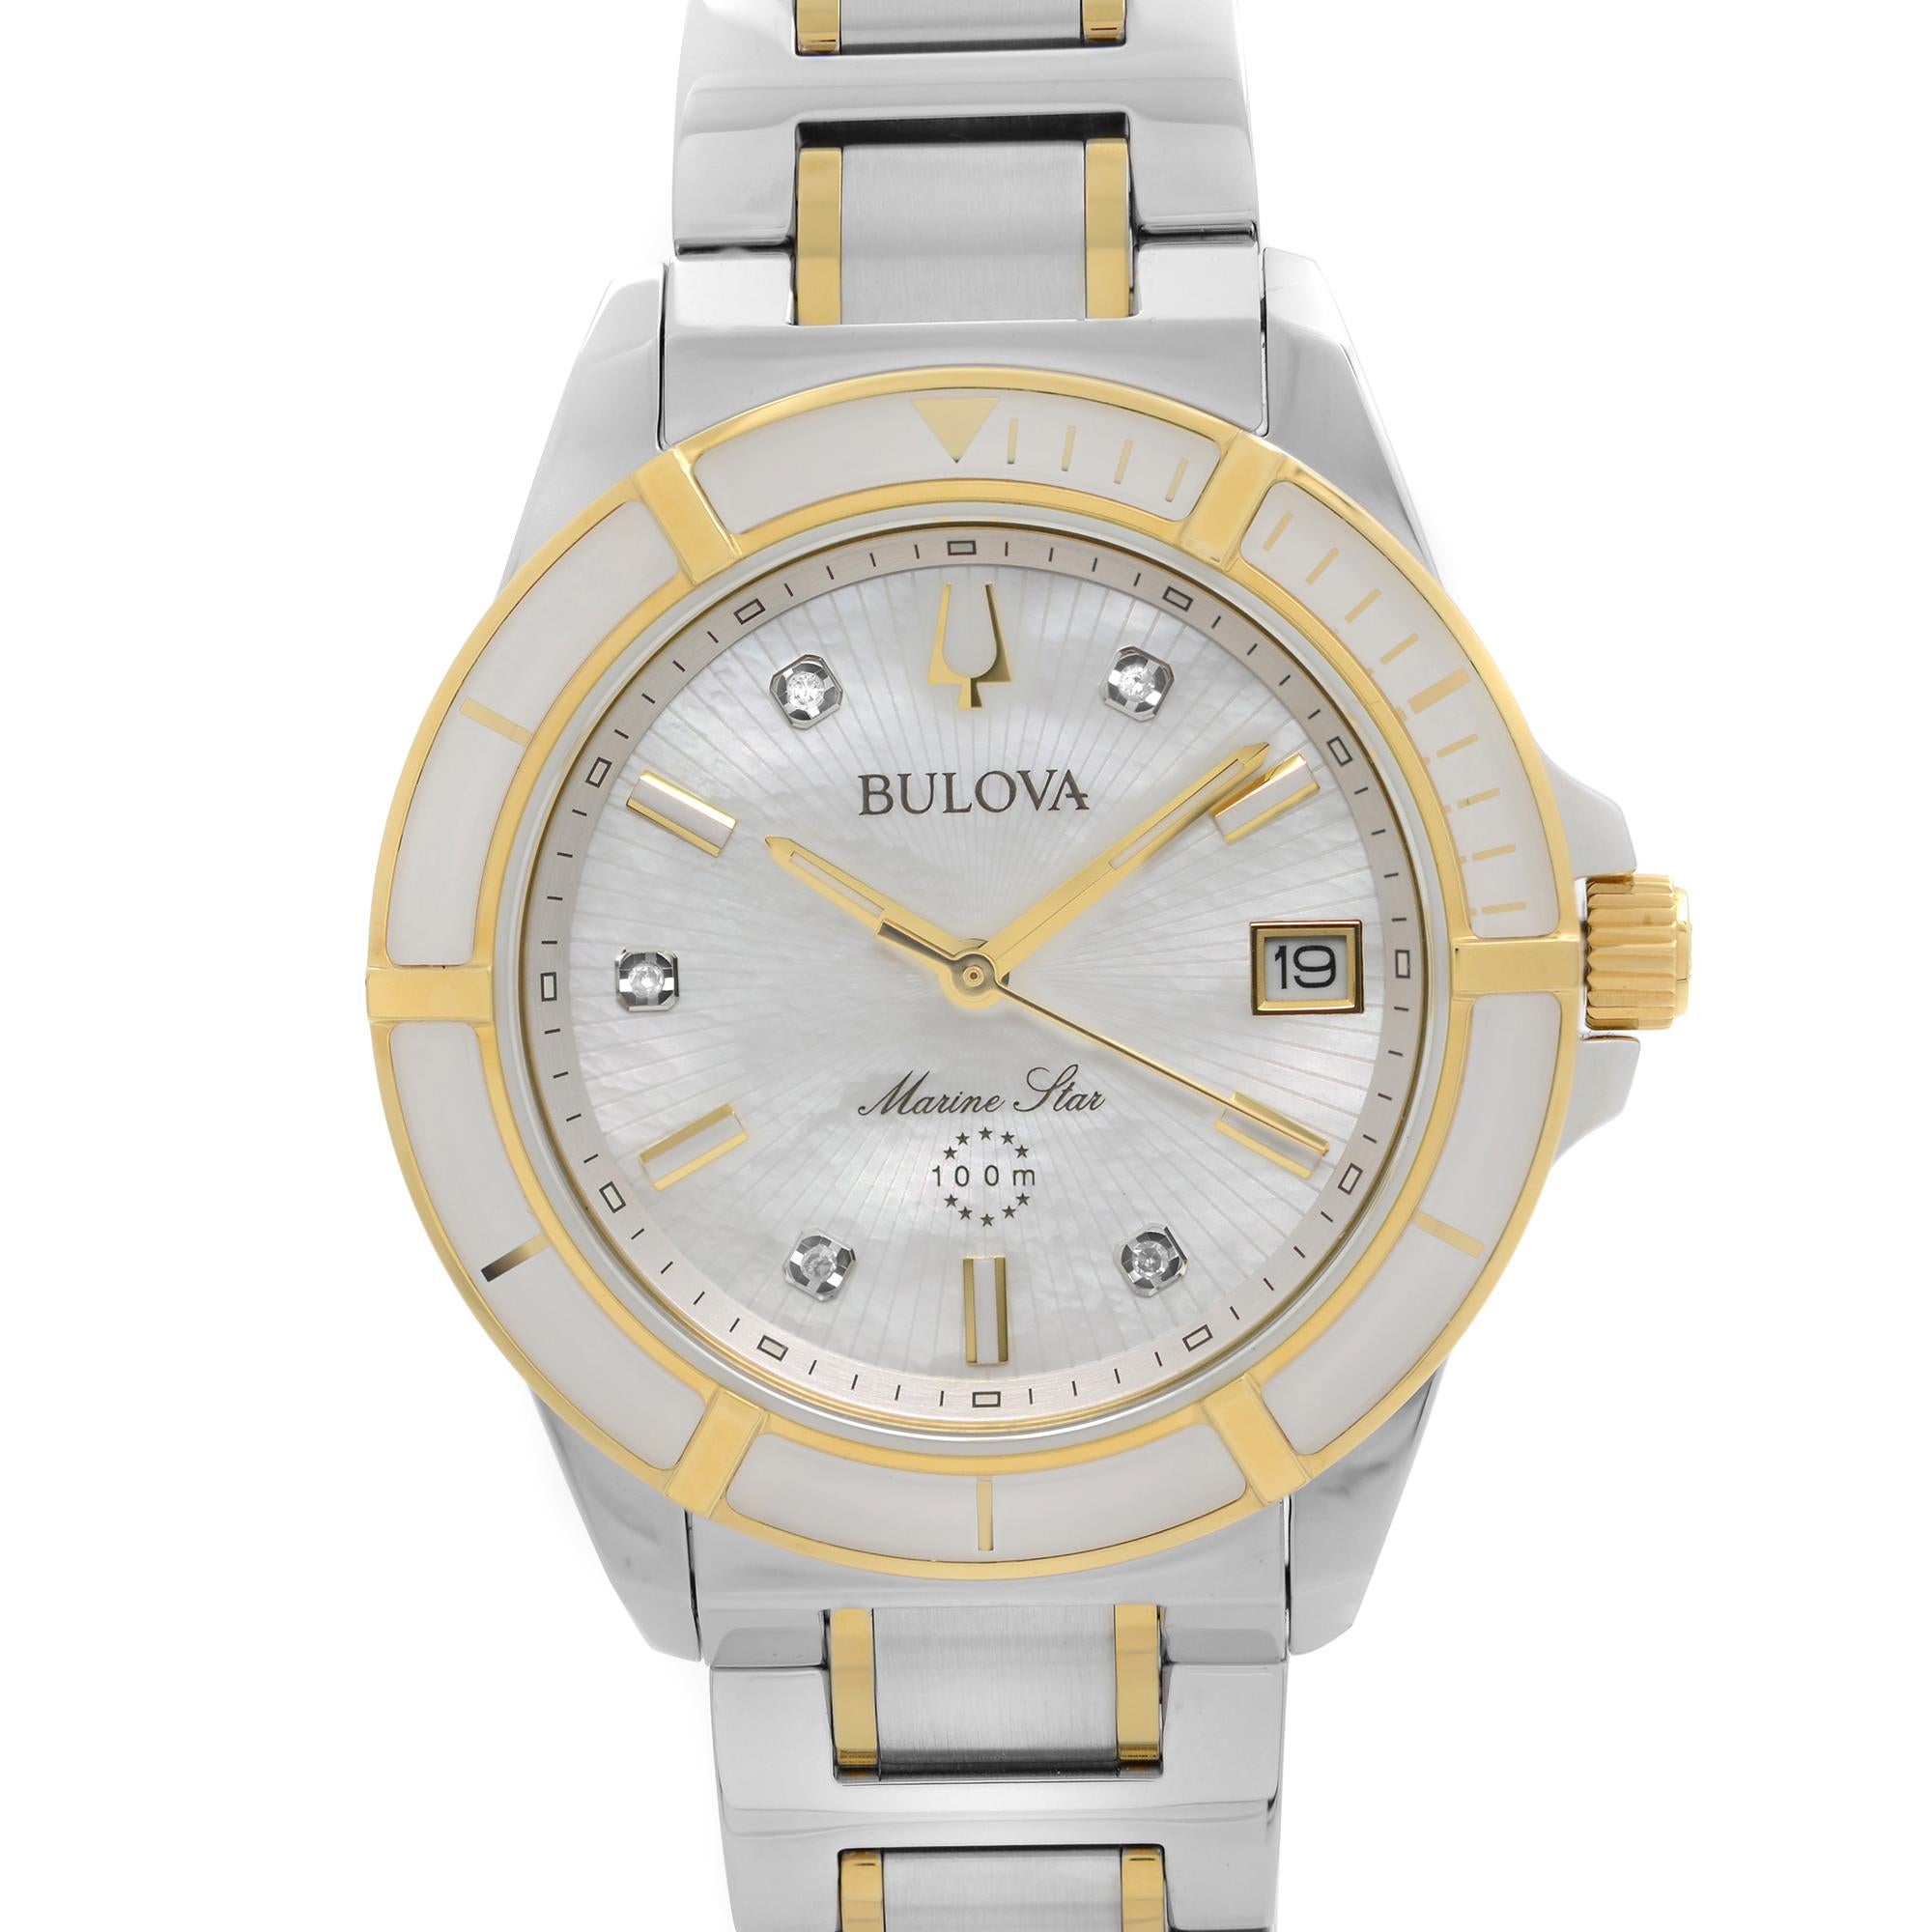 Display Model Bulova Marine Star Quartz Ladies Watch 98P186. May have Minor Blemishes From Storing. Original Box and Papers are Included. This Beautiful Timepiece is Powered by Quartz (Battery) Movement And Features: Stainless Steel Case and